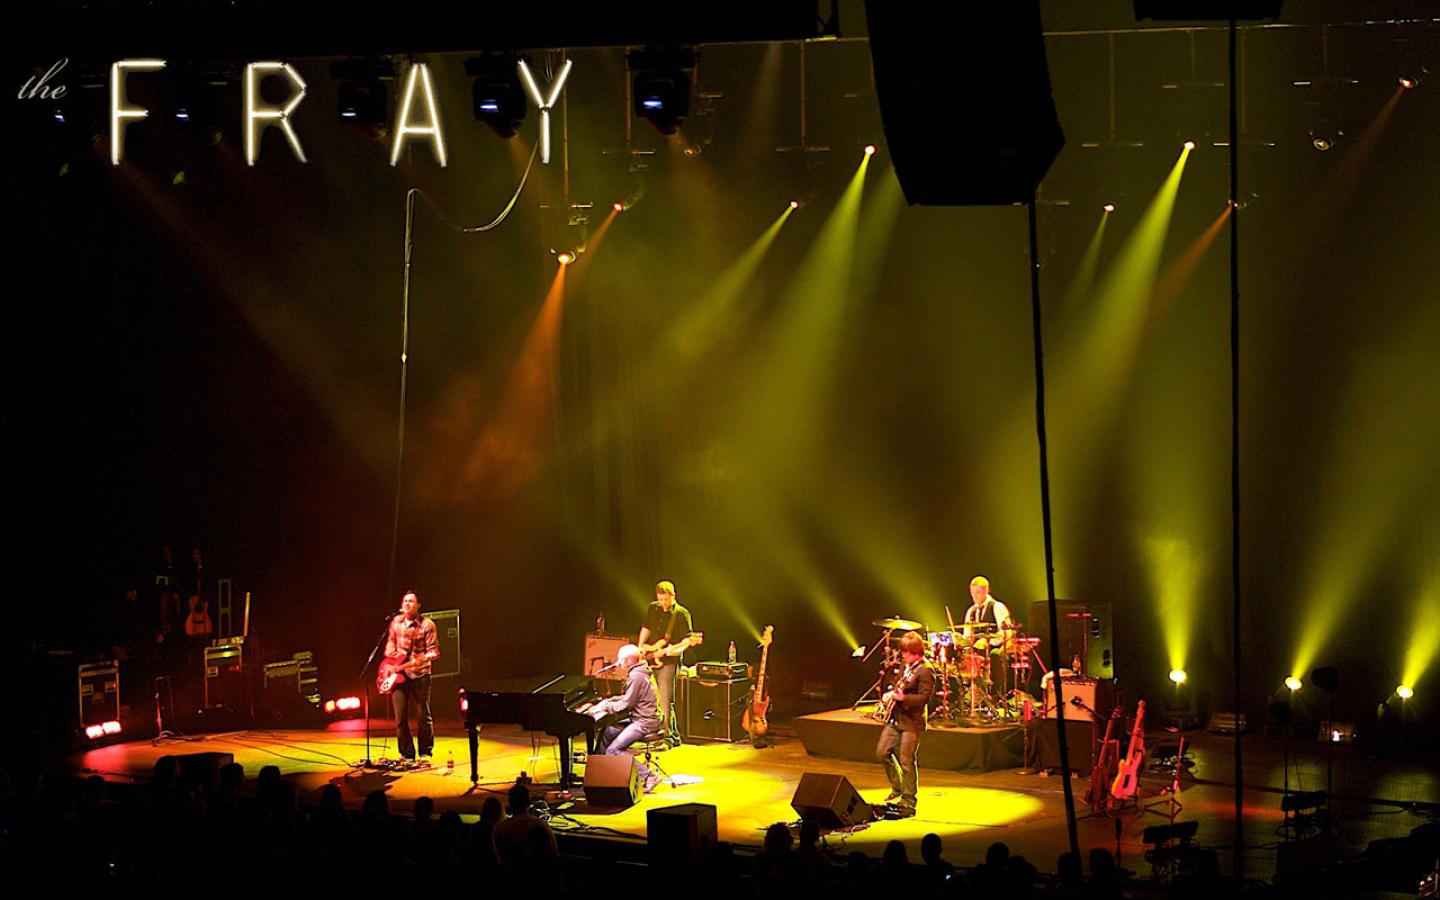 The Fray -  Wallpaper #1 1440 x 900 